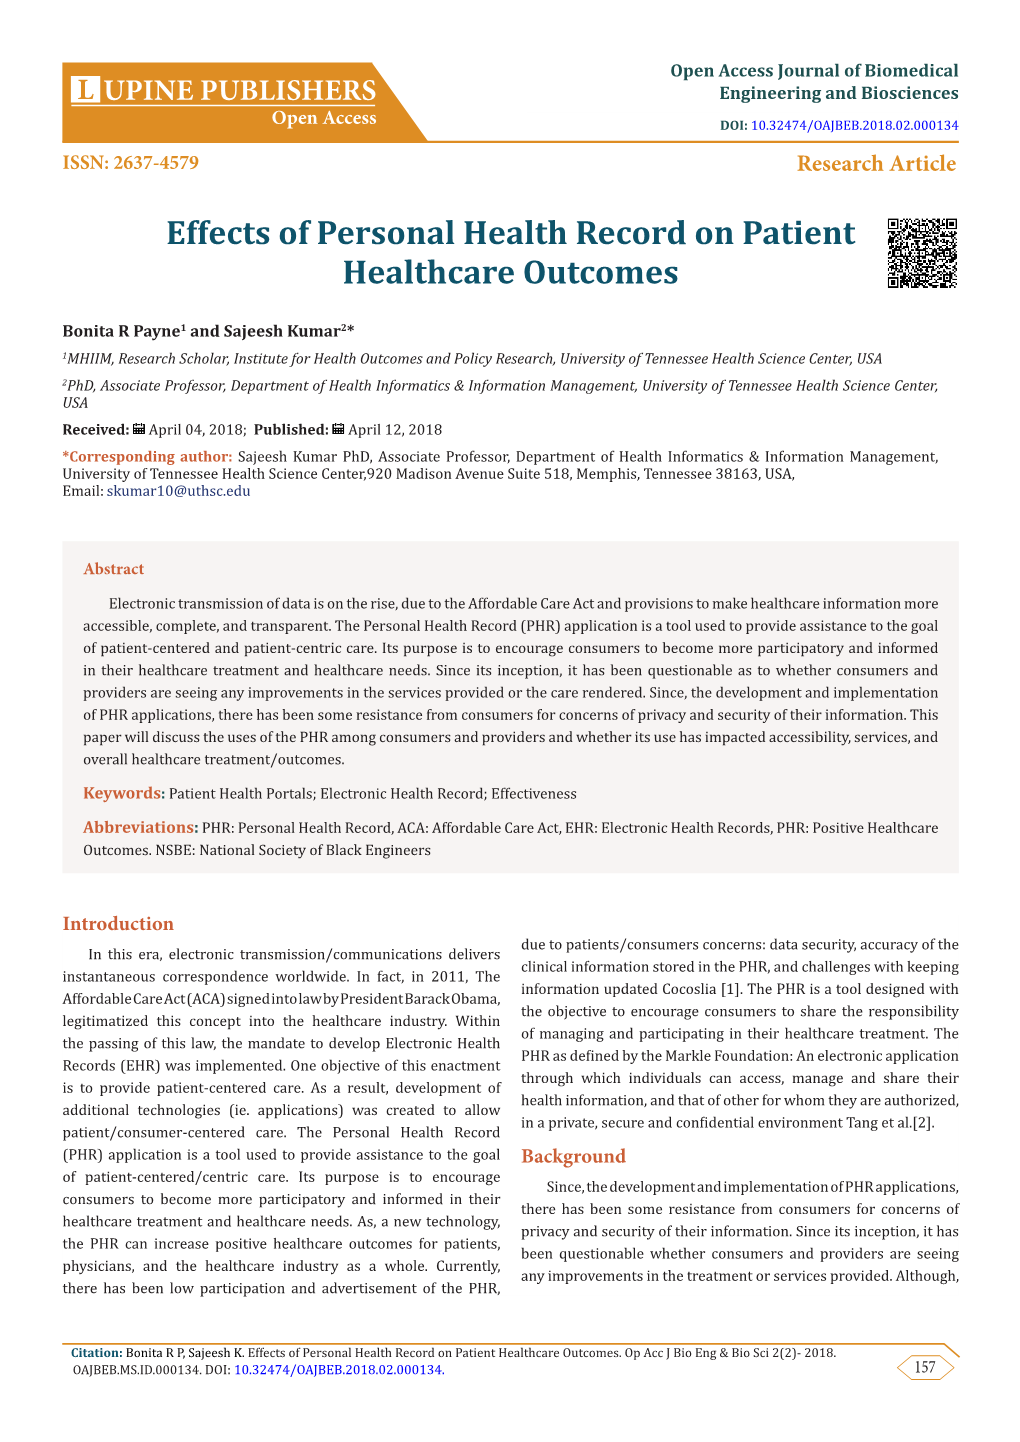 Effects of Personal Health Record on Patient Healthcare Outcomes